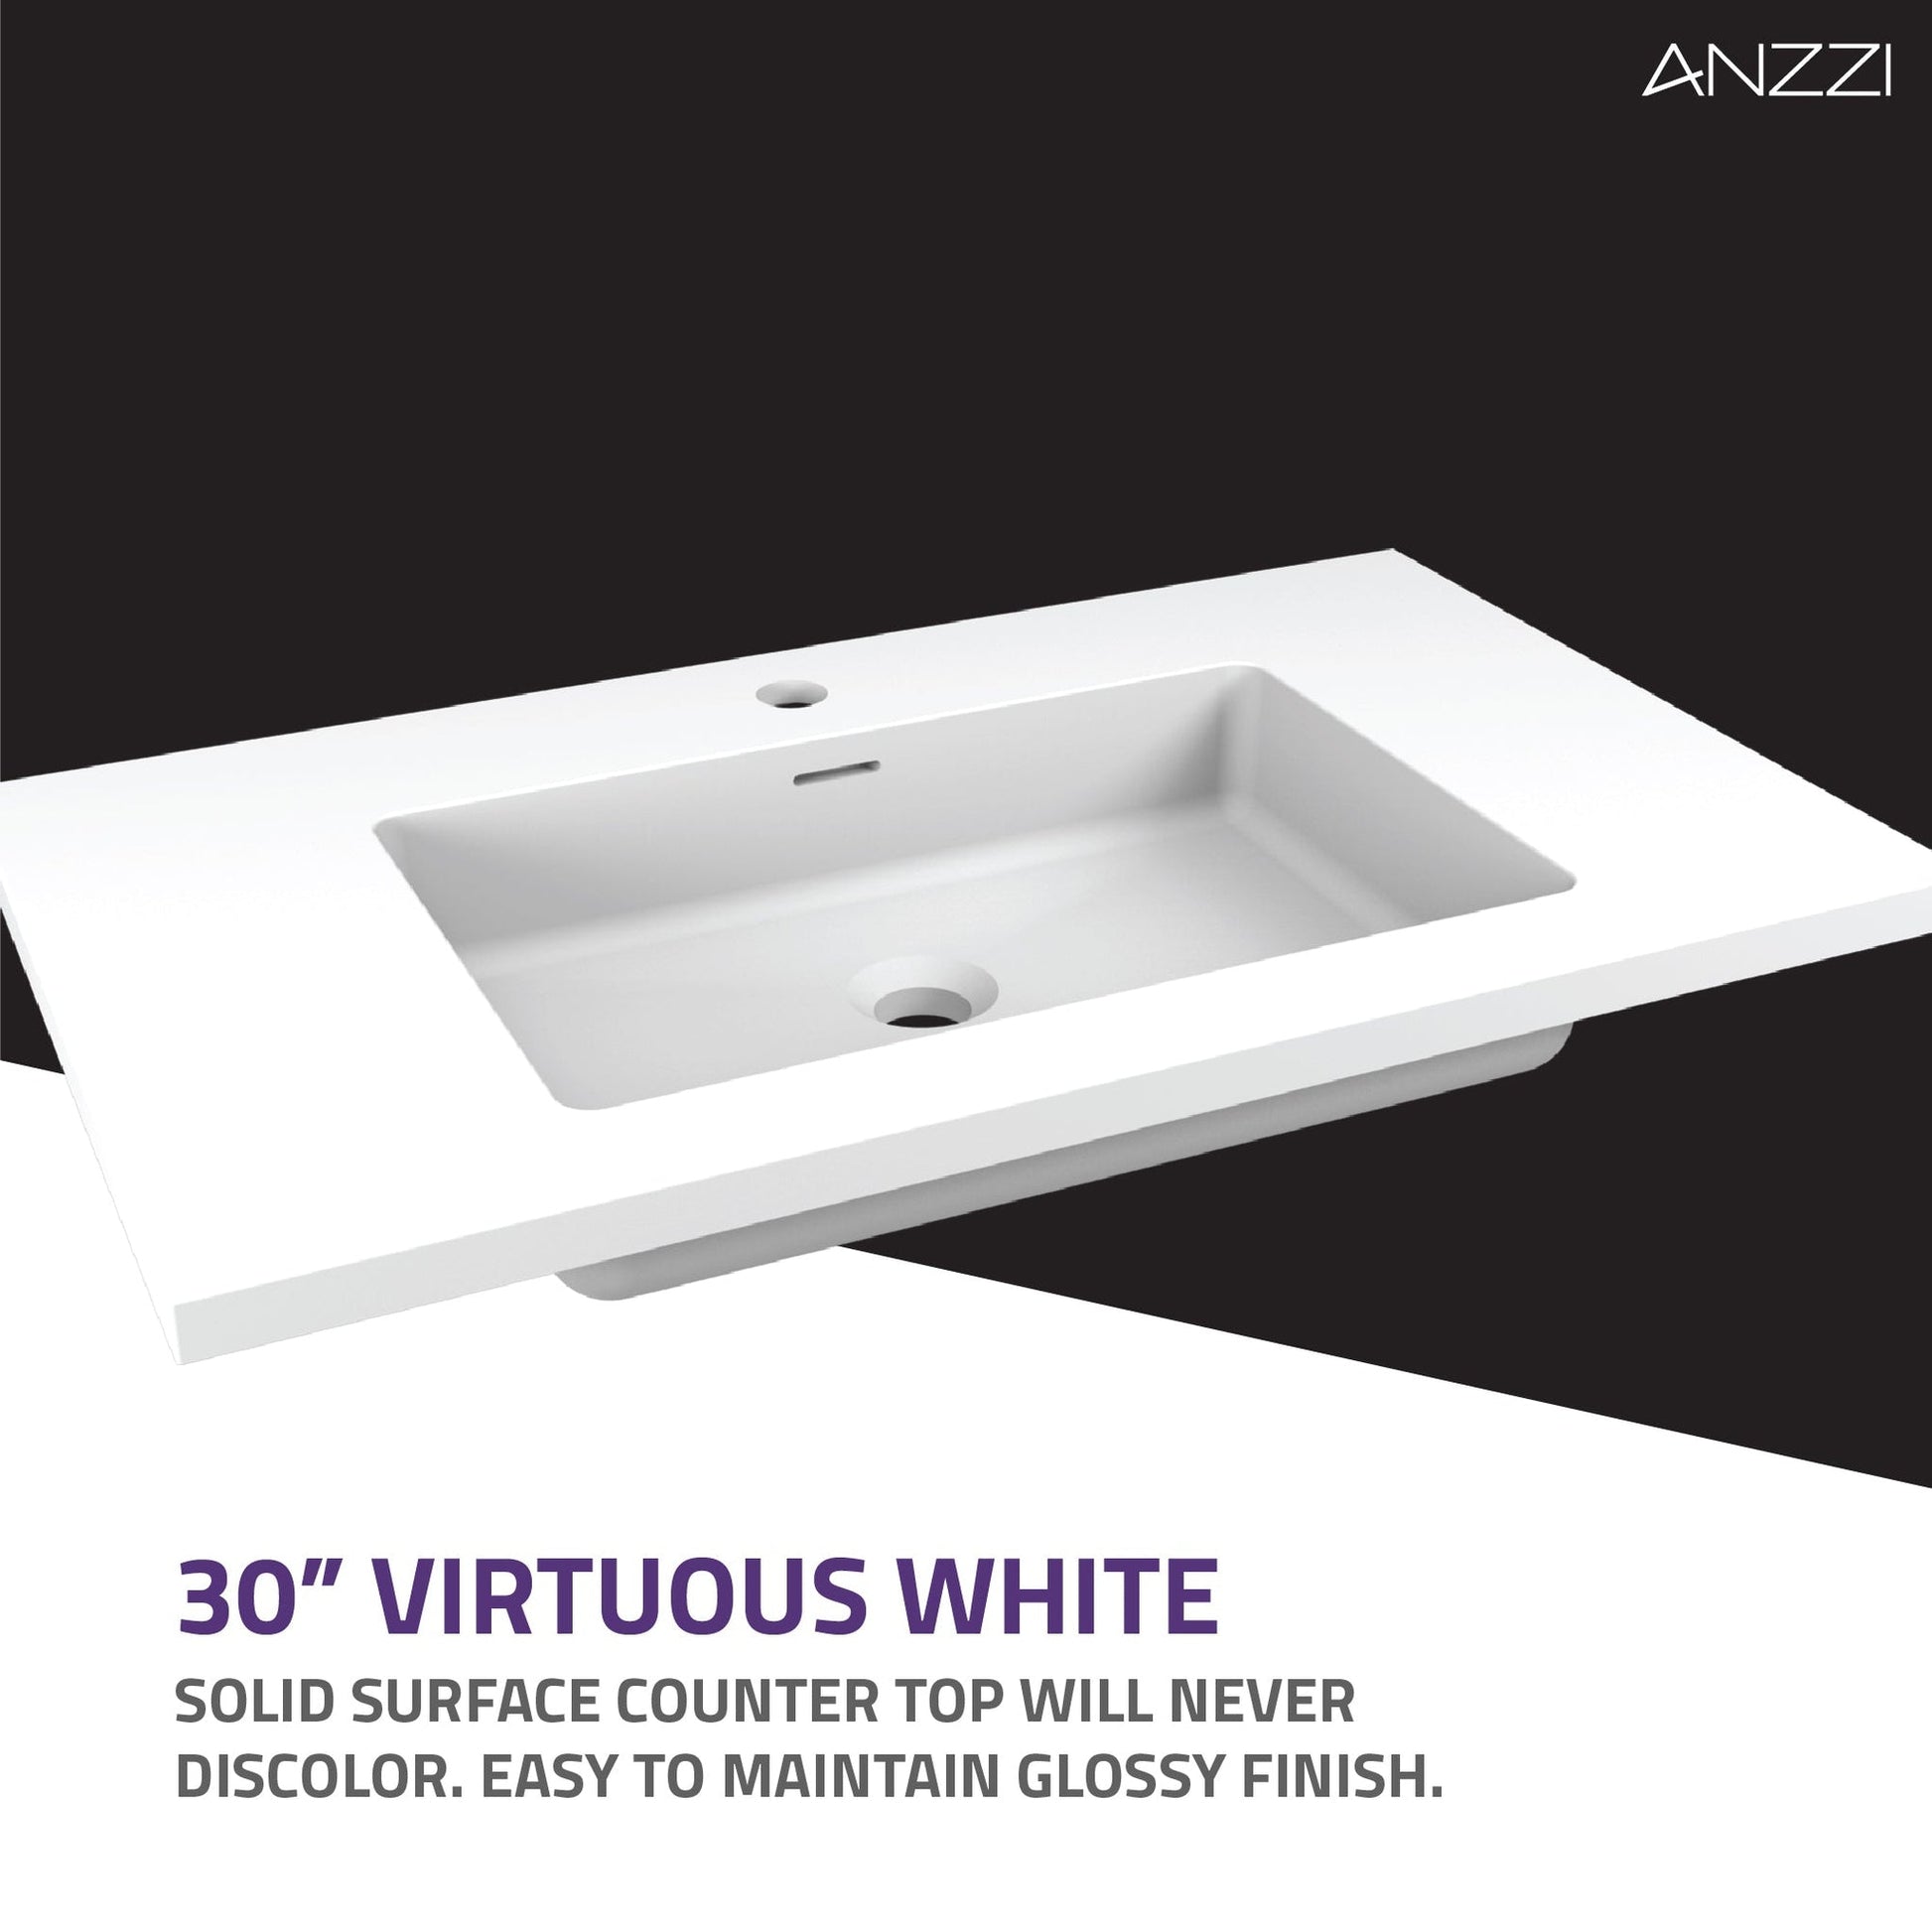 ANZZI Conques Series 30" x 20" Rich Gray Solid Wood Bathroom Vanity With Glossy White Sink and Countertop